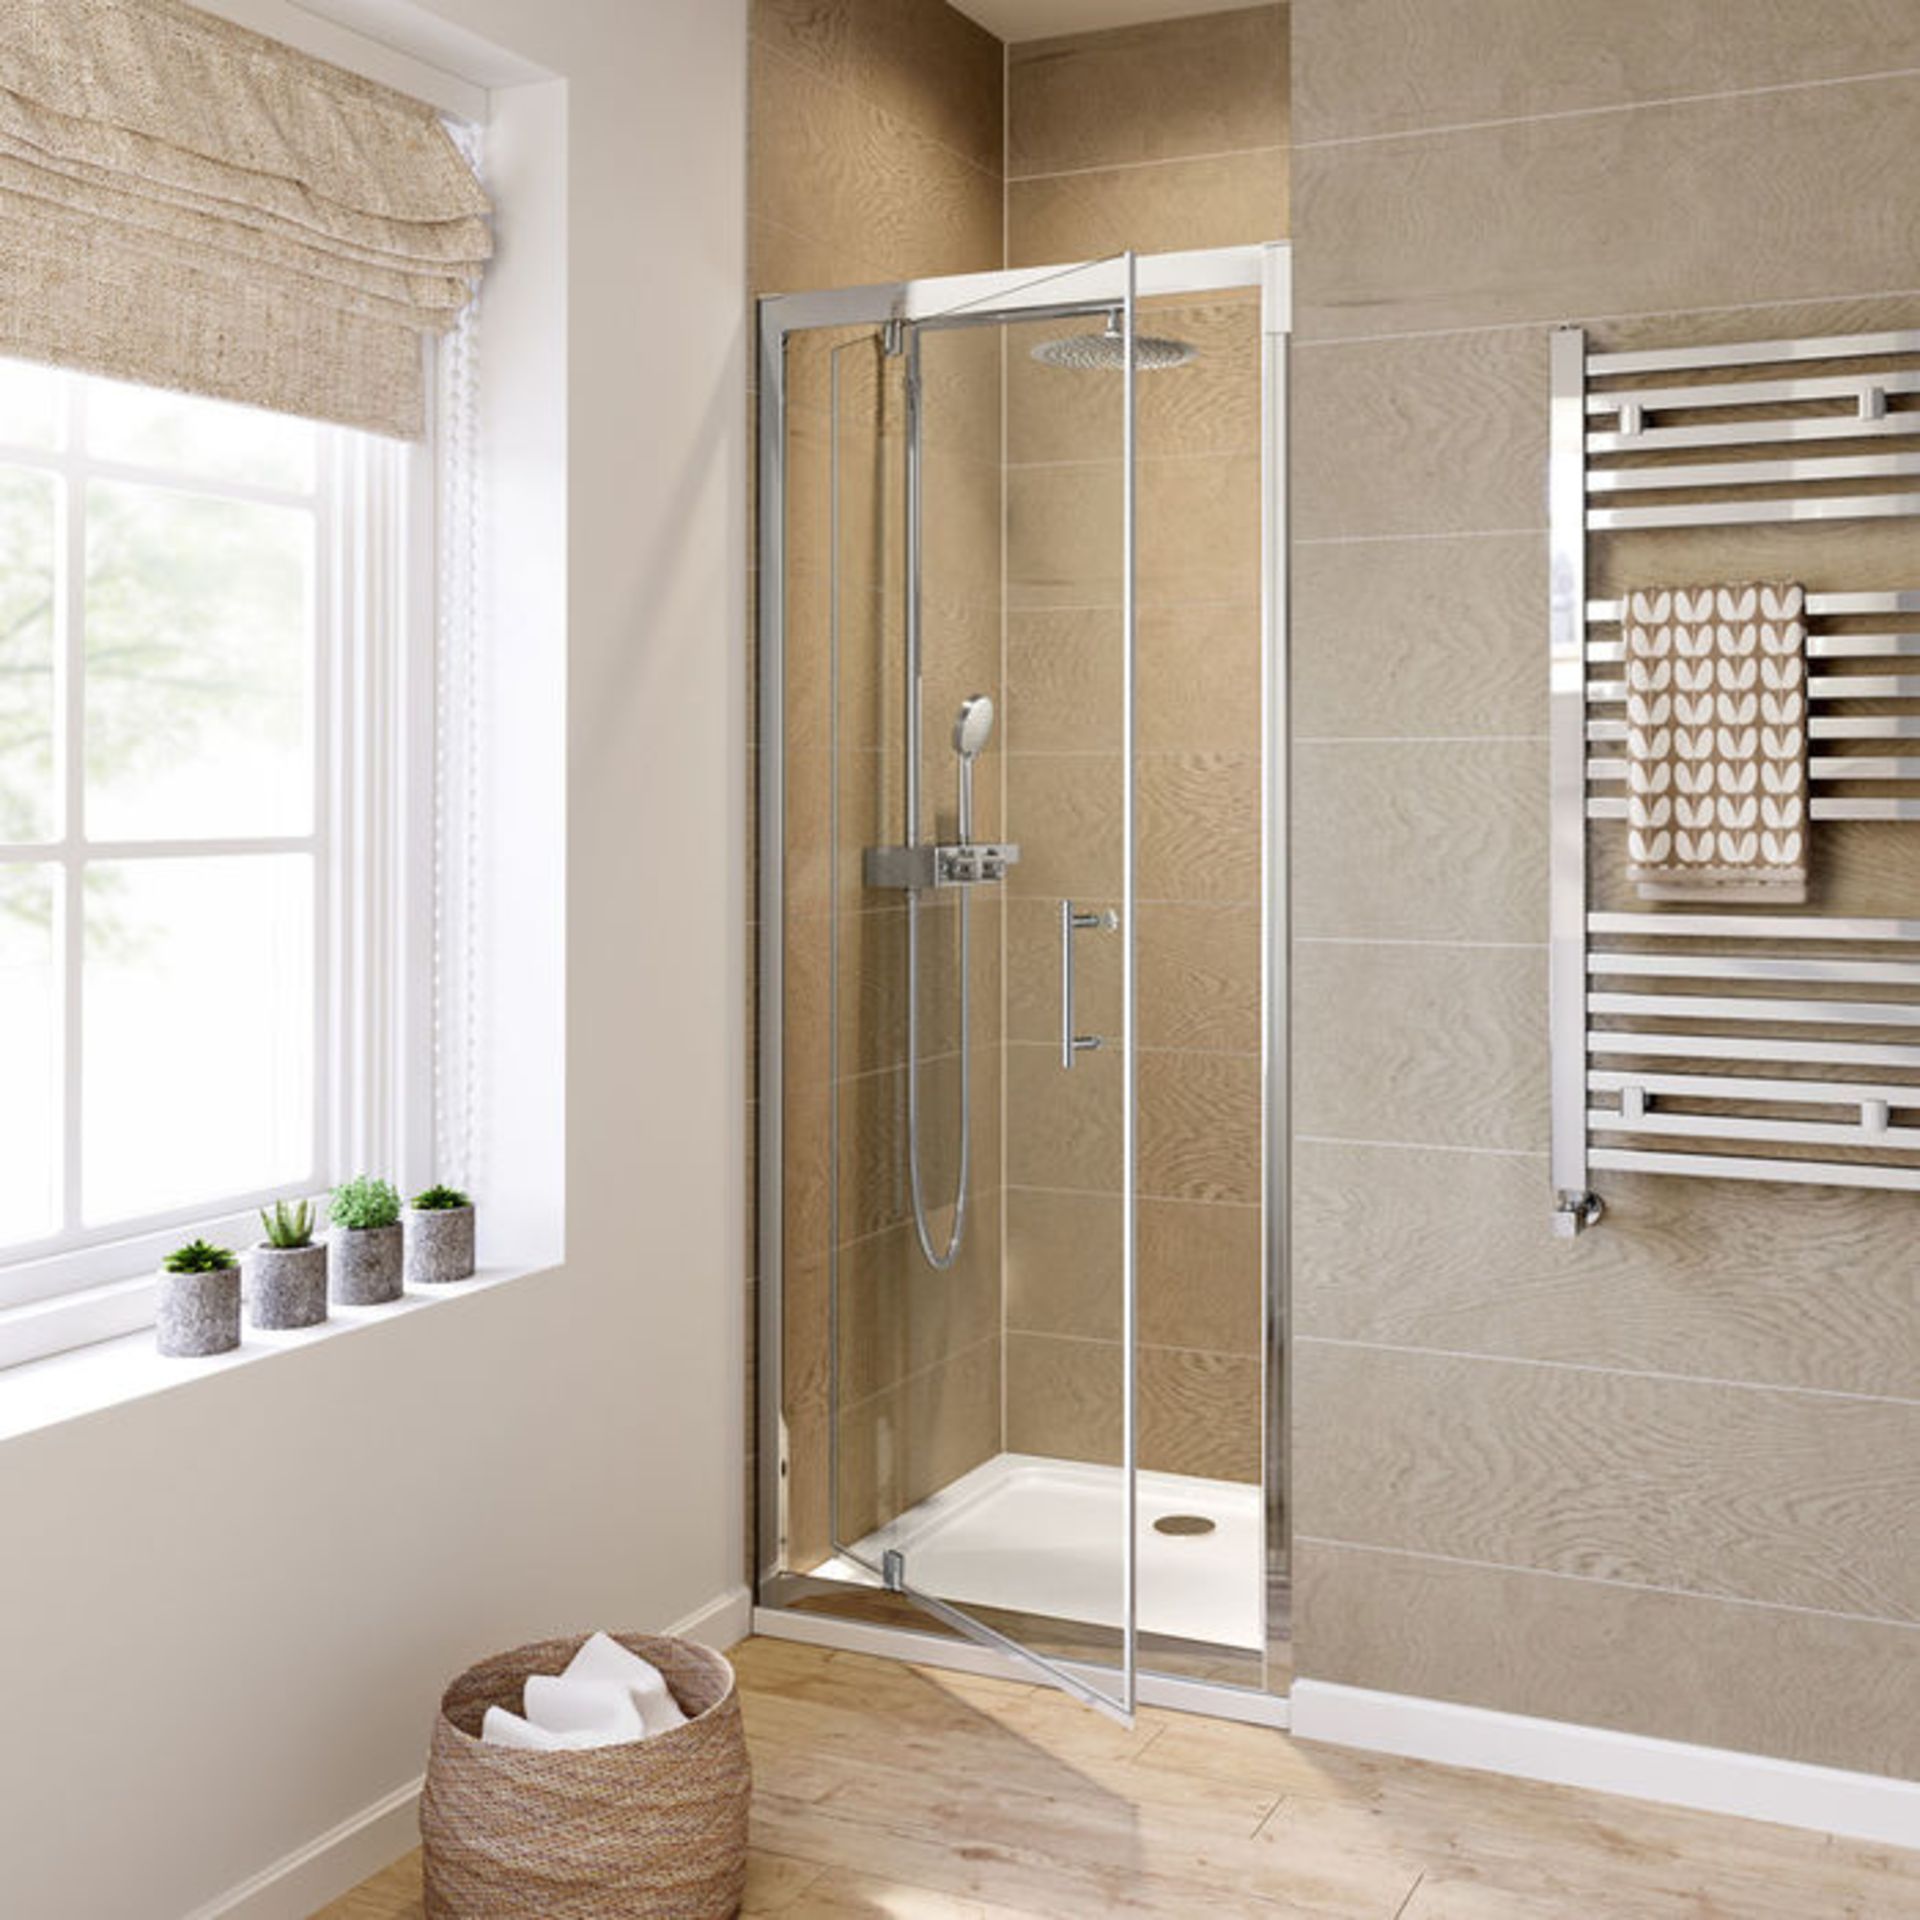 NEW Twyfords 700mm - 6mm - Premium Pivot Shower Door. RRP £299.99.8mm Safety Glass Fully wate... - Image 2 of 2